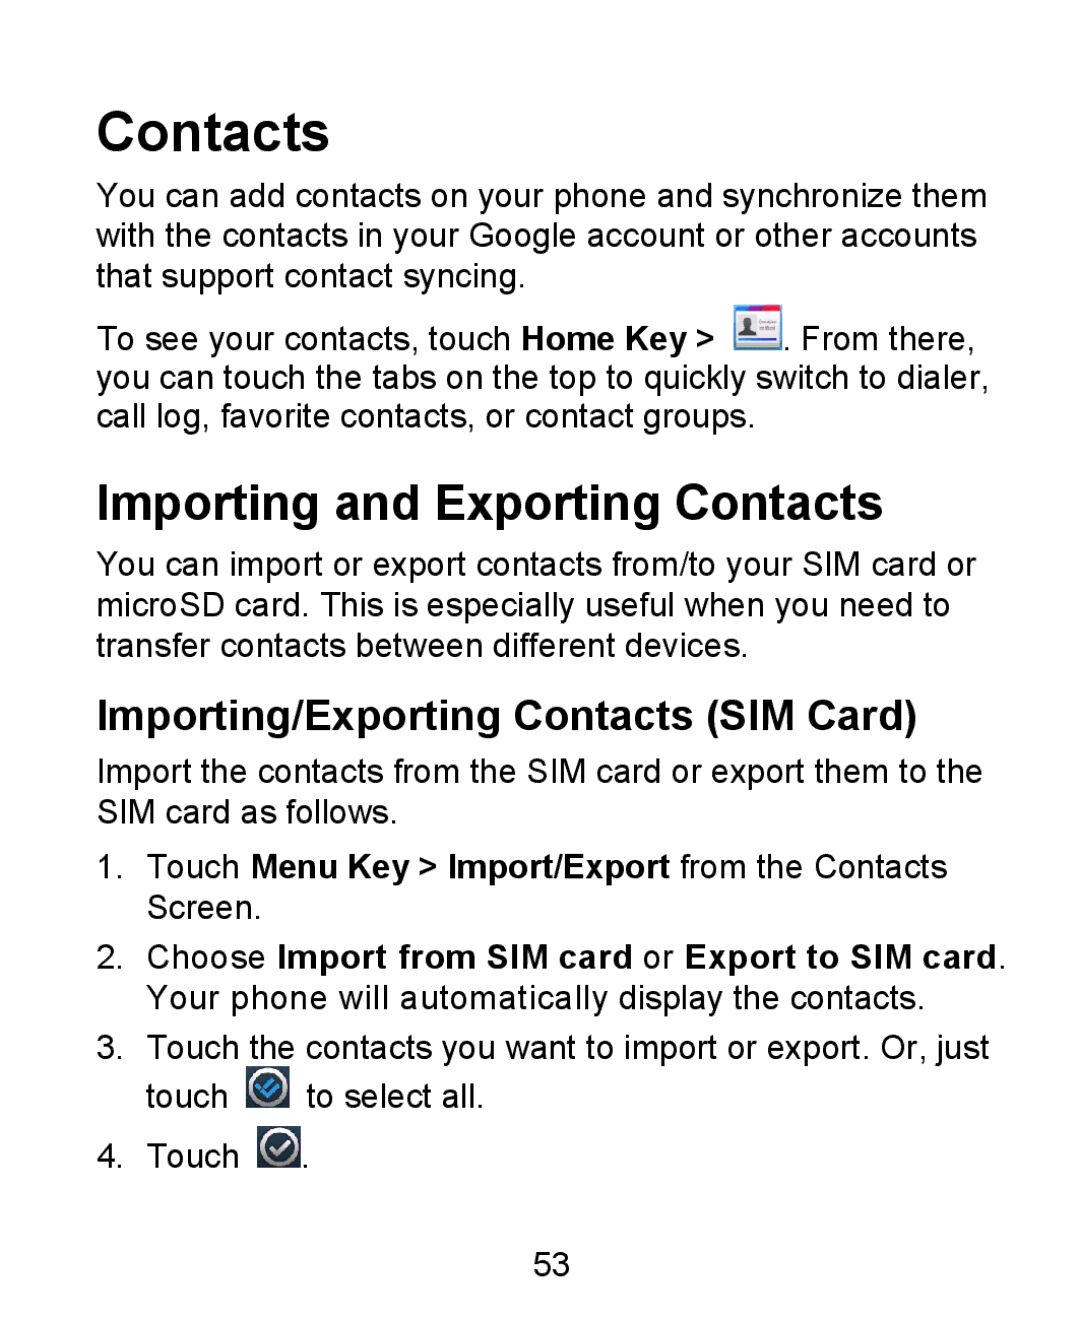 ZTE KIS user manual Importing and Exporting Contacts, Importing/Exporting Contacts SIM Card 